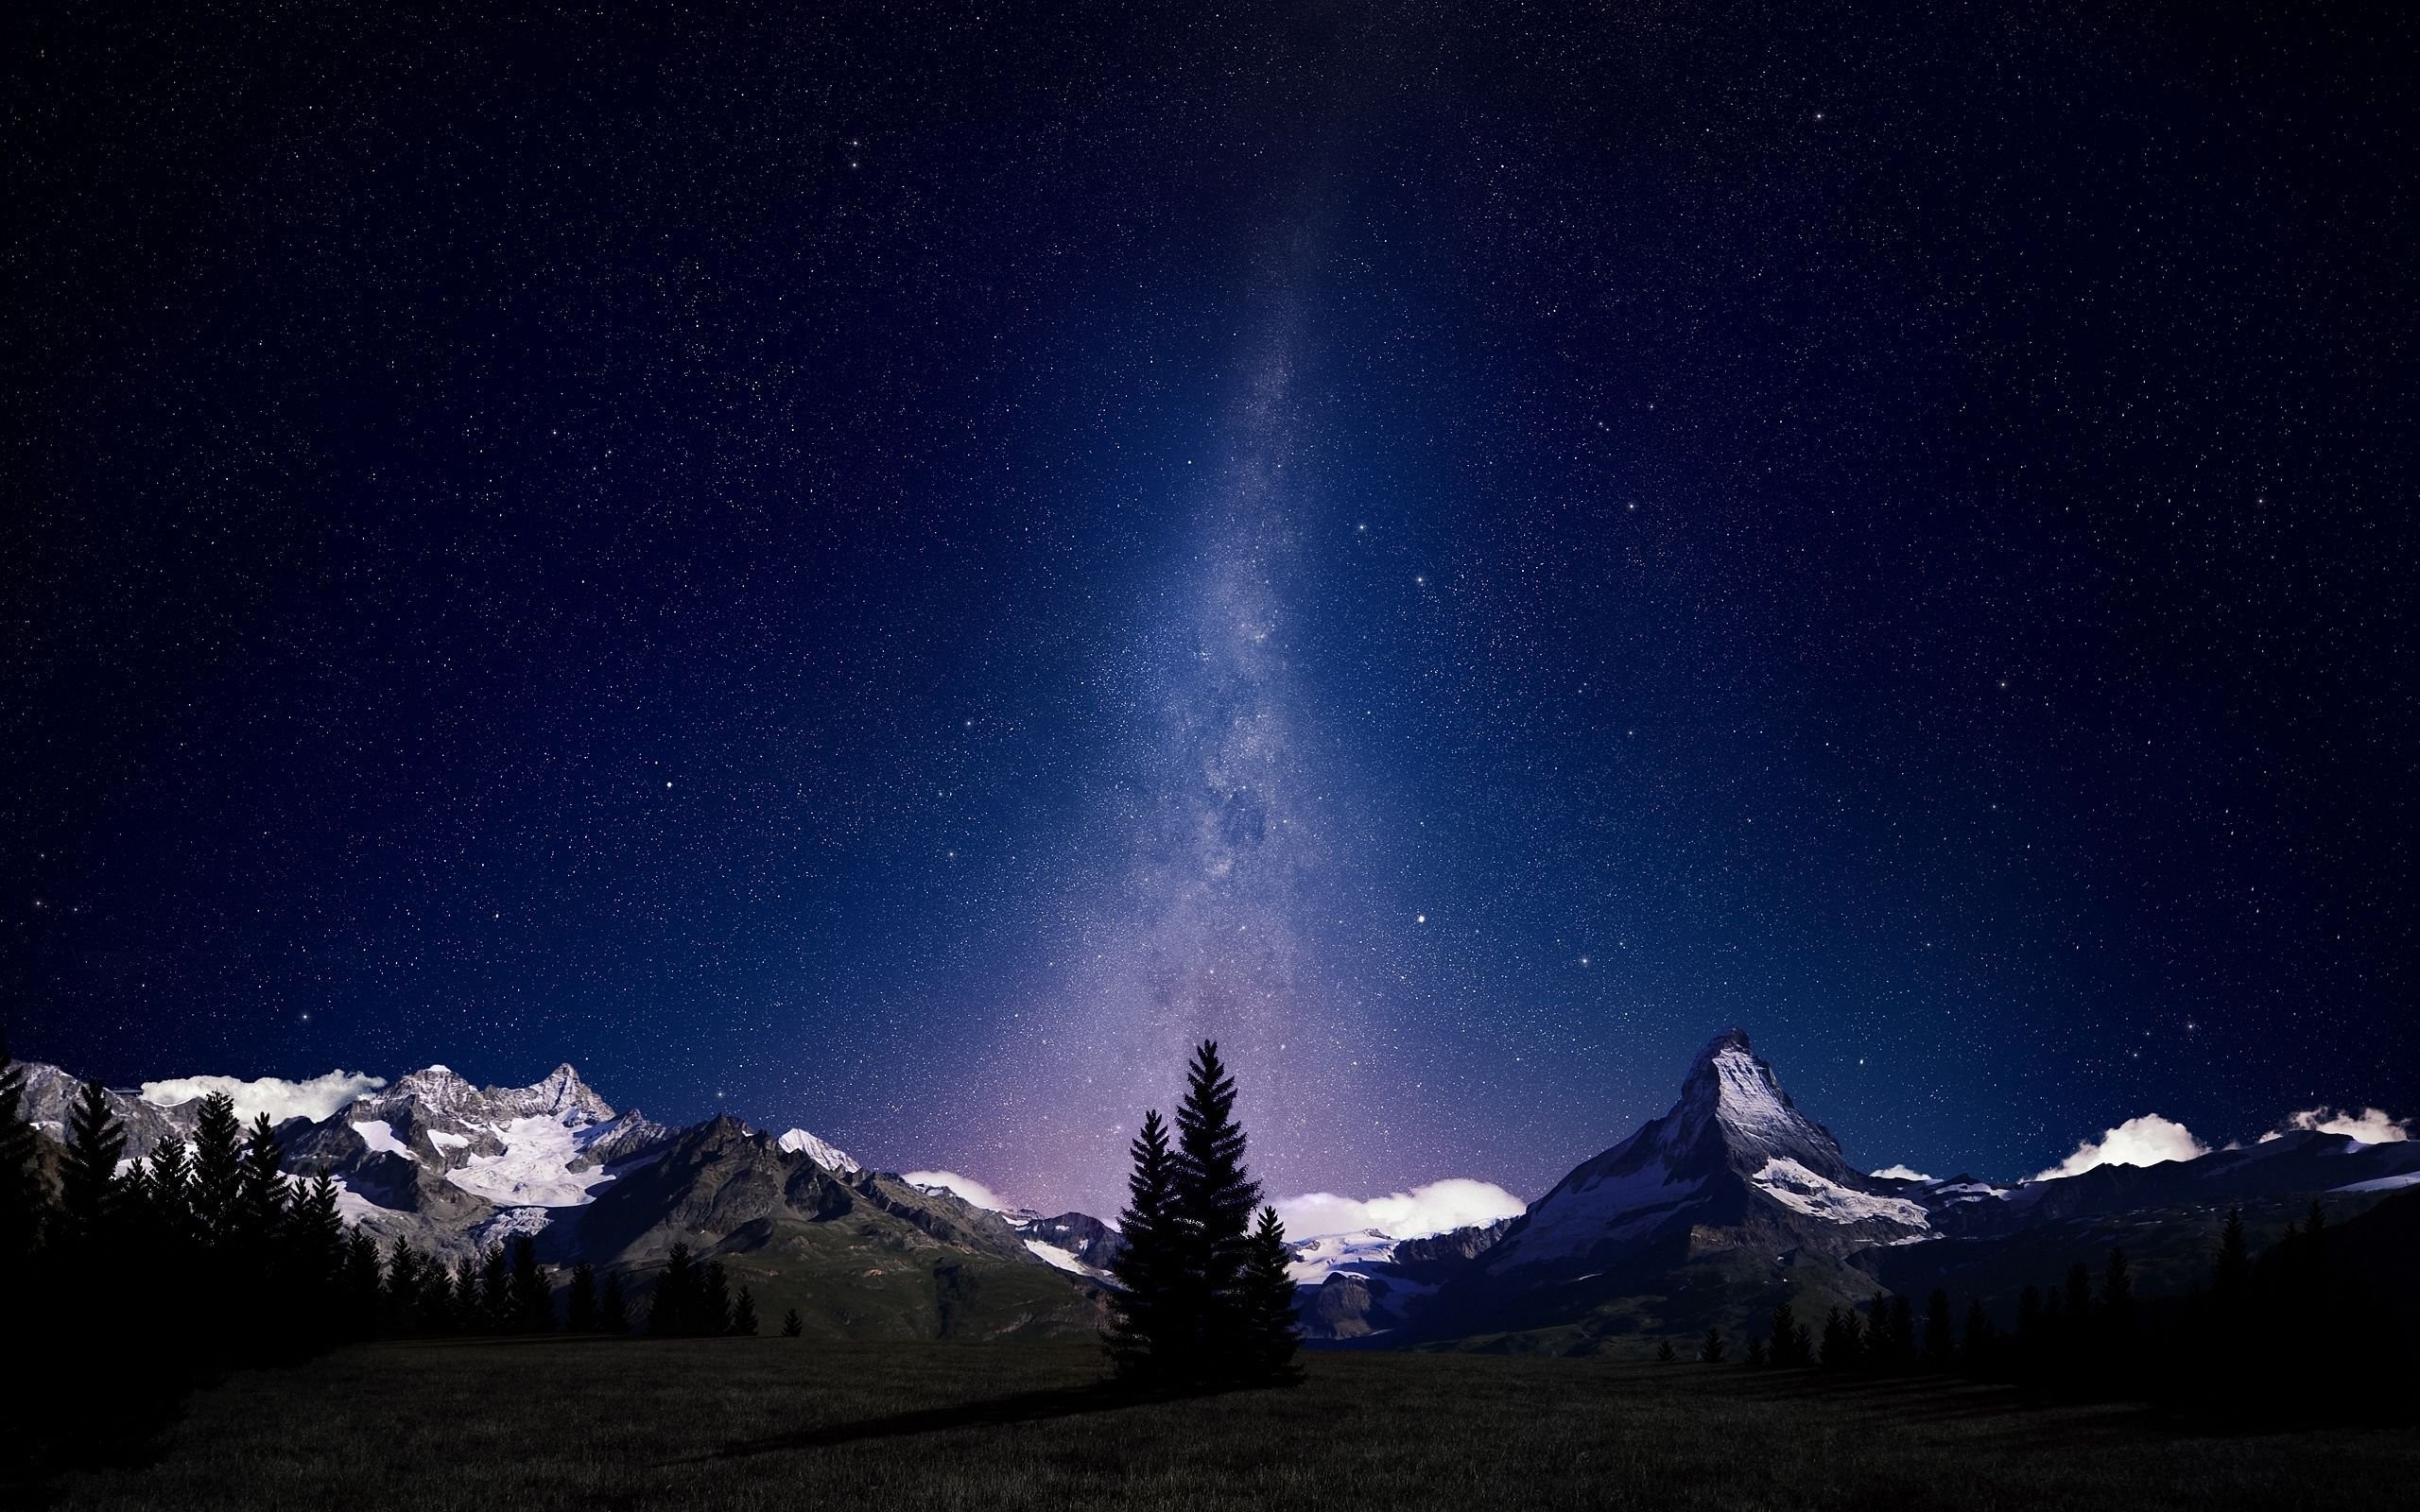 Night Sky Lights Over Snowy Mountains